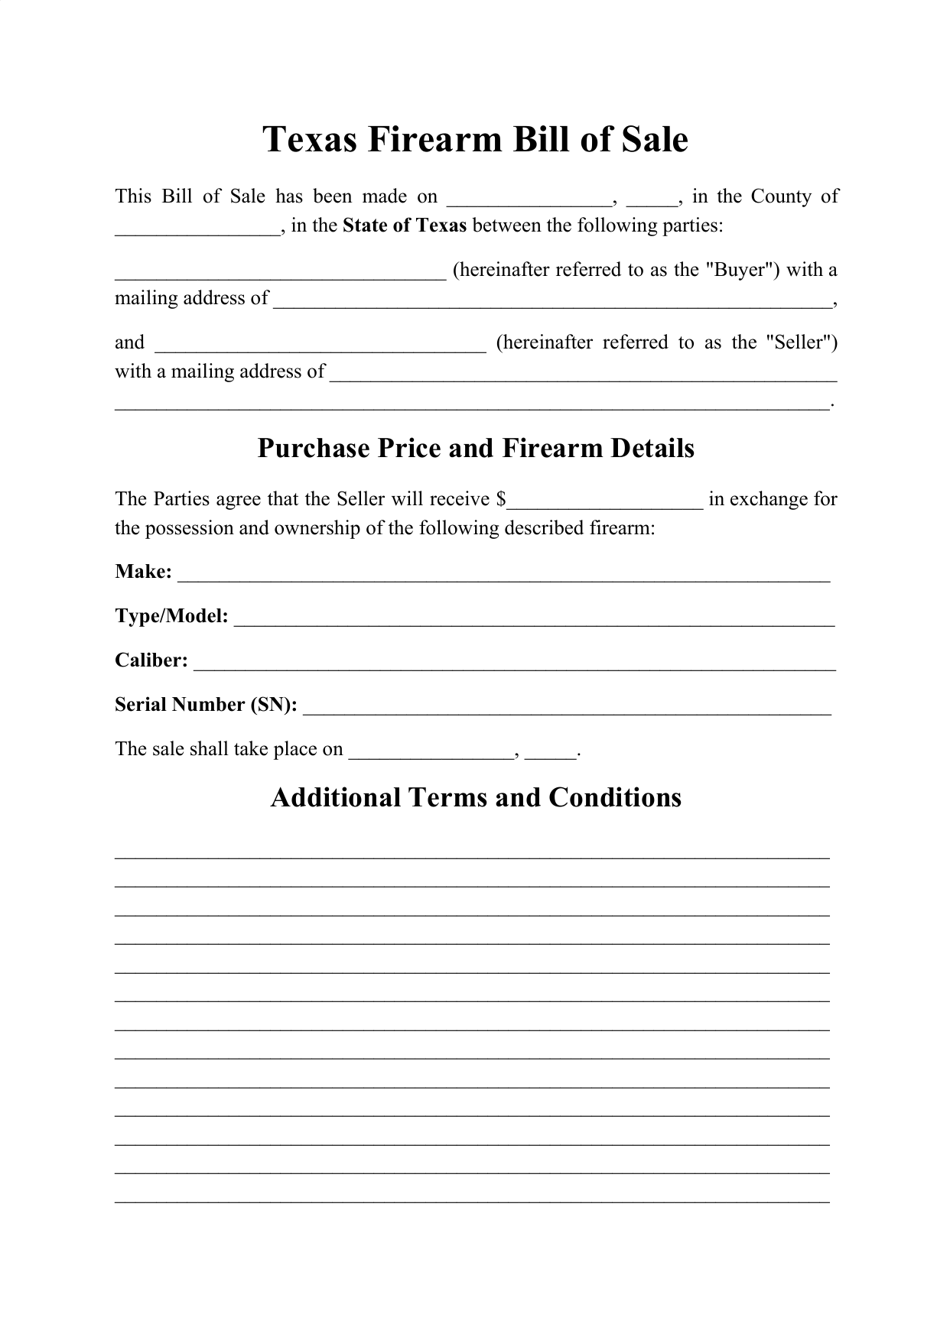 Texas Firearm Bill of Sale Form Fill Out Sign Online and Download